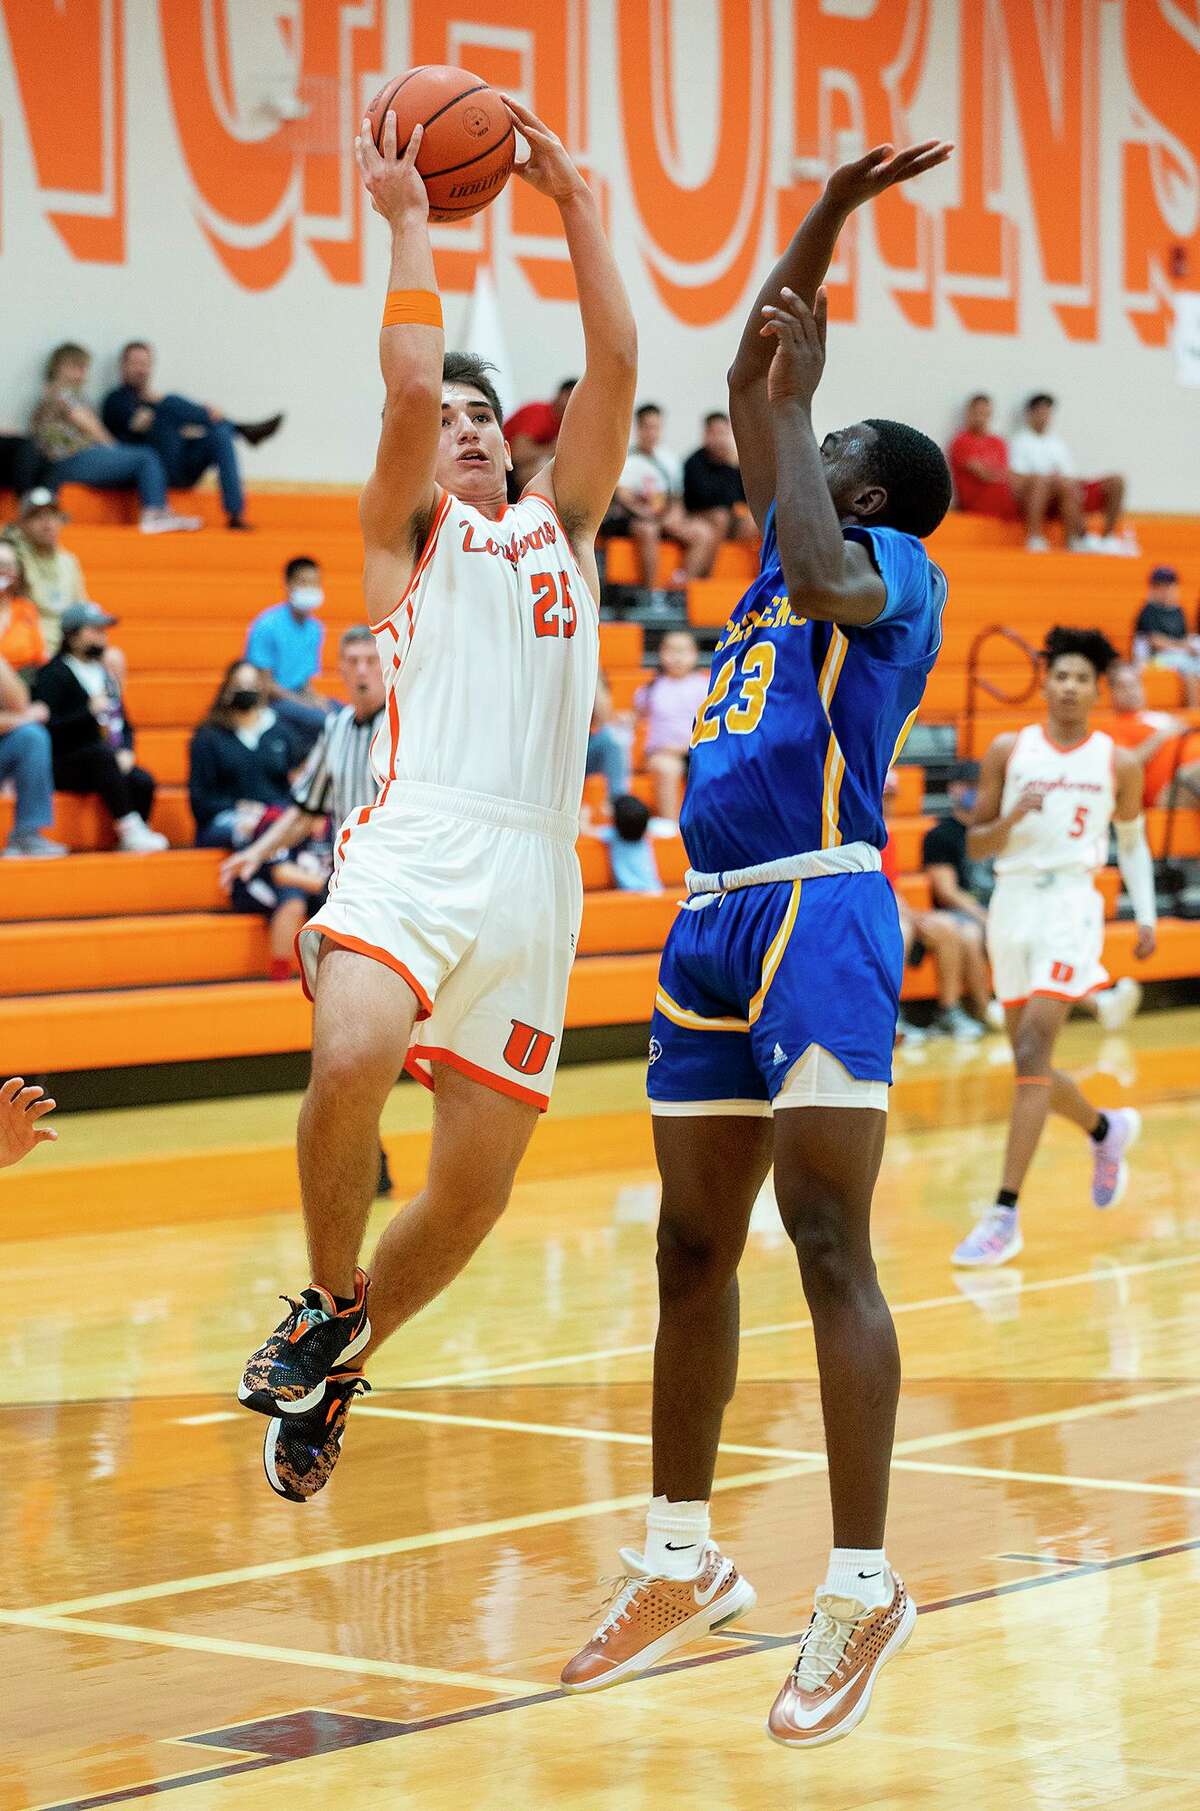 United High School’s Diego Saldaña goes for a layup during a game against Clemens High School, Saturday, Dec. 18, 2021 at United High School.